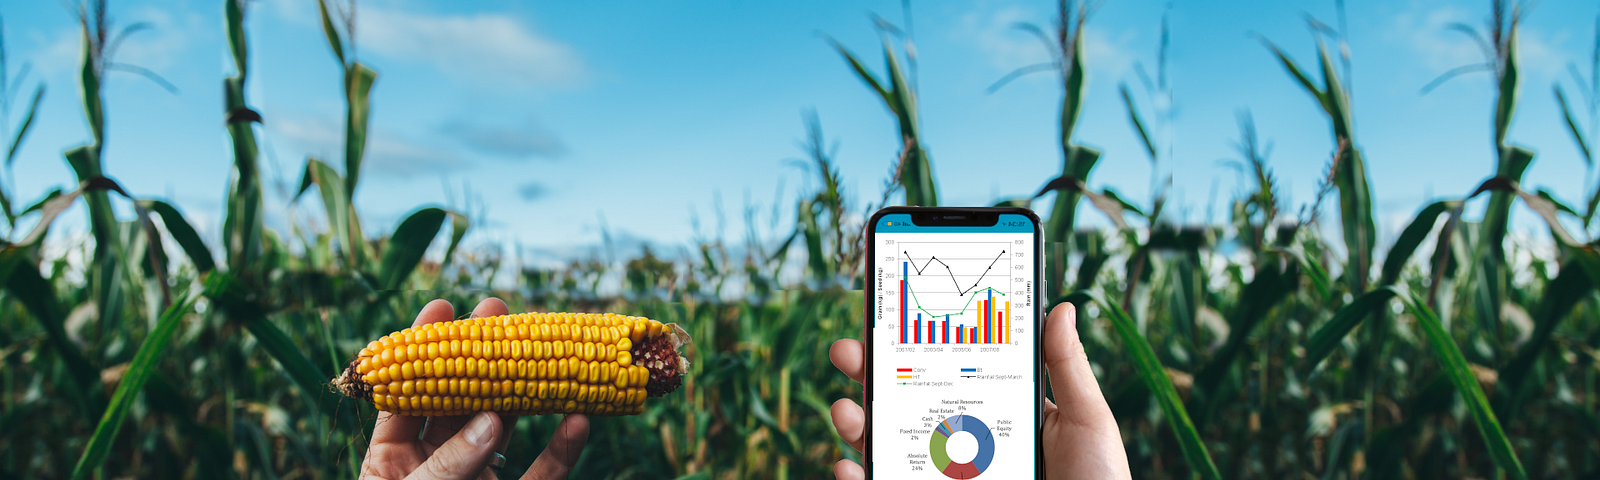 Data Science in Agriculture Image